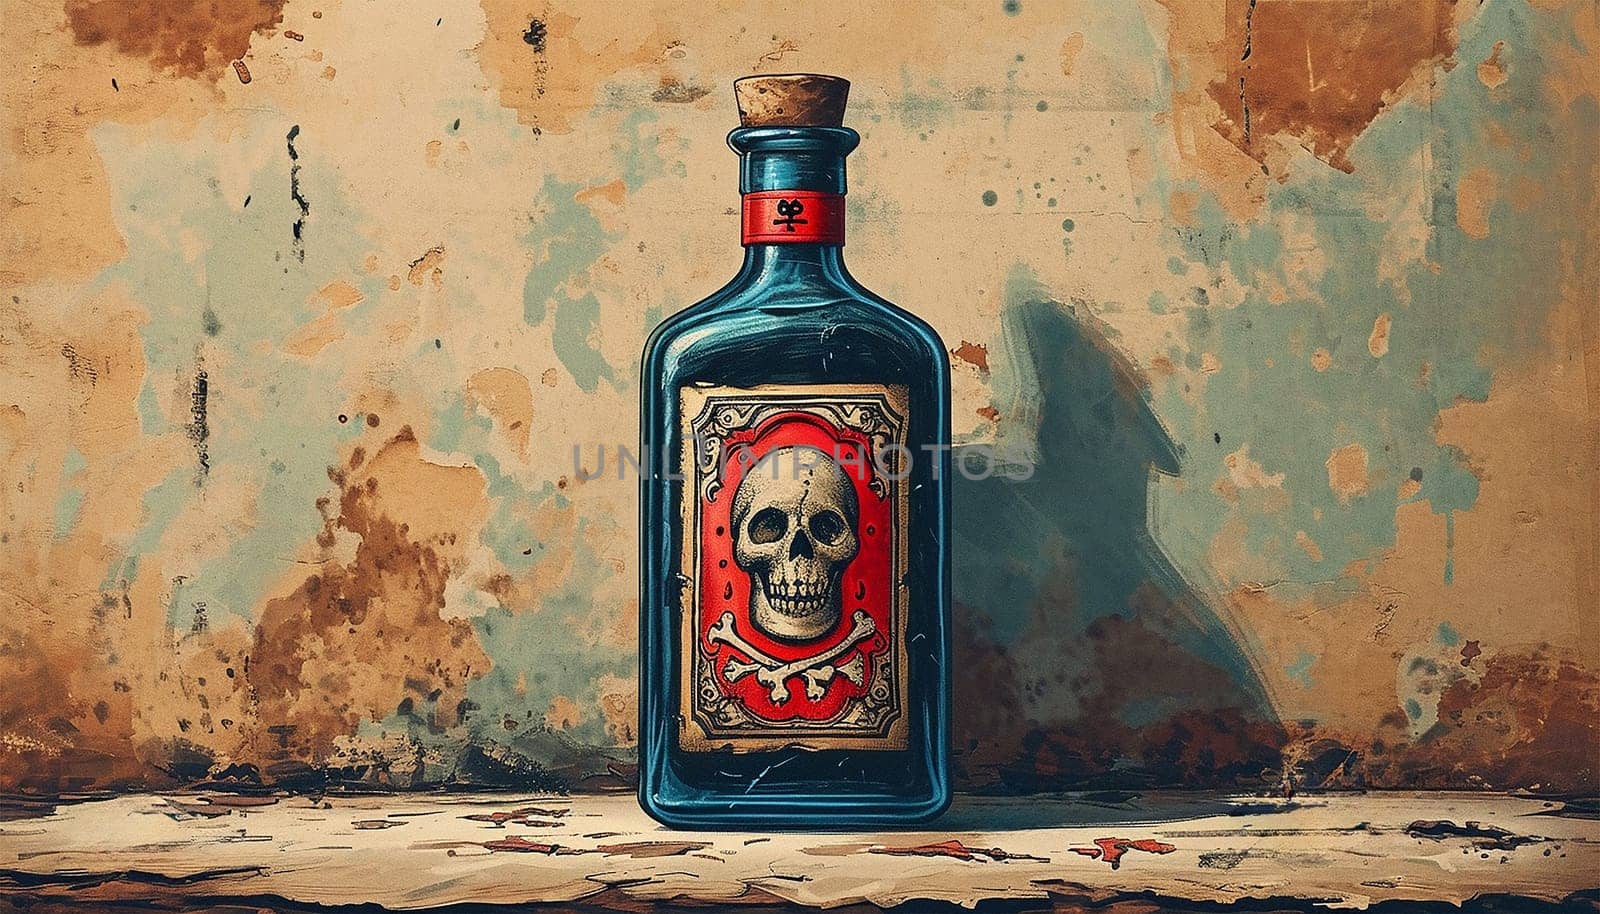 Poison bottle with skull and bones stands among pharmaceutical bottles. Danger sign, symbol of death. Concept background on poison poisoning, pharmaceutical, chemistry, medical, old science topic. Copy space